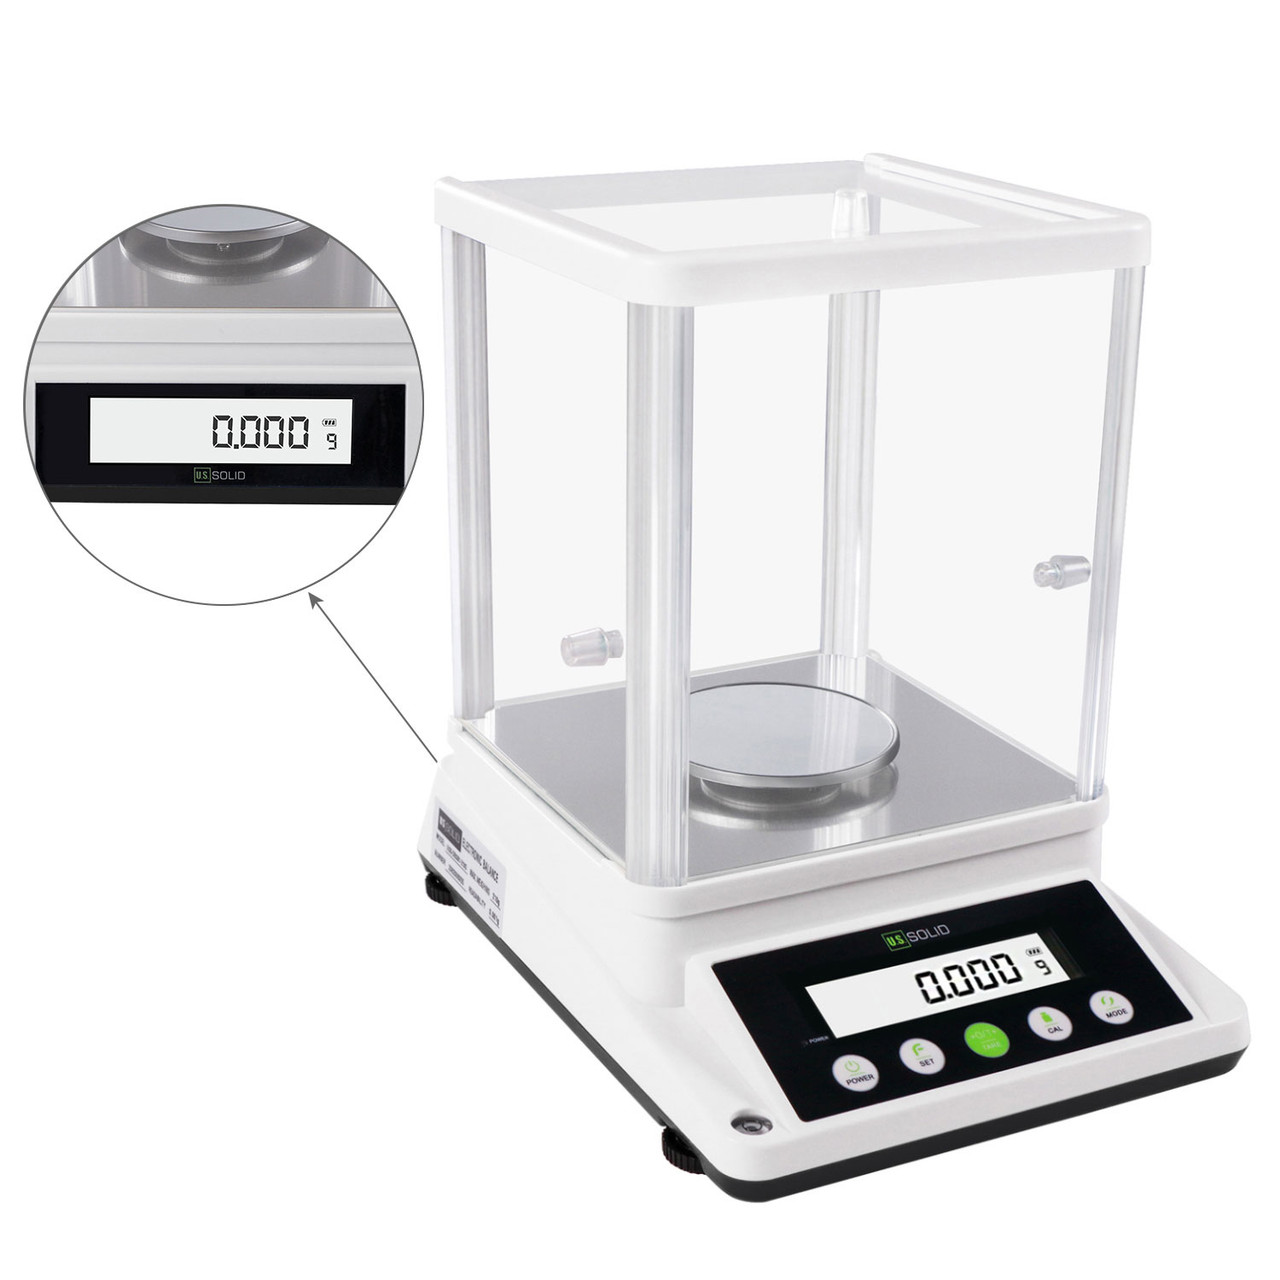 ND High Precision Electronic Weighing Scale (Middle - Small Size) -  宏德衡器－電子天平．秤重磅秤